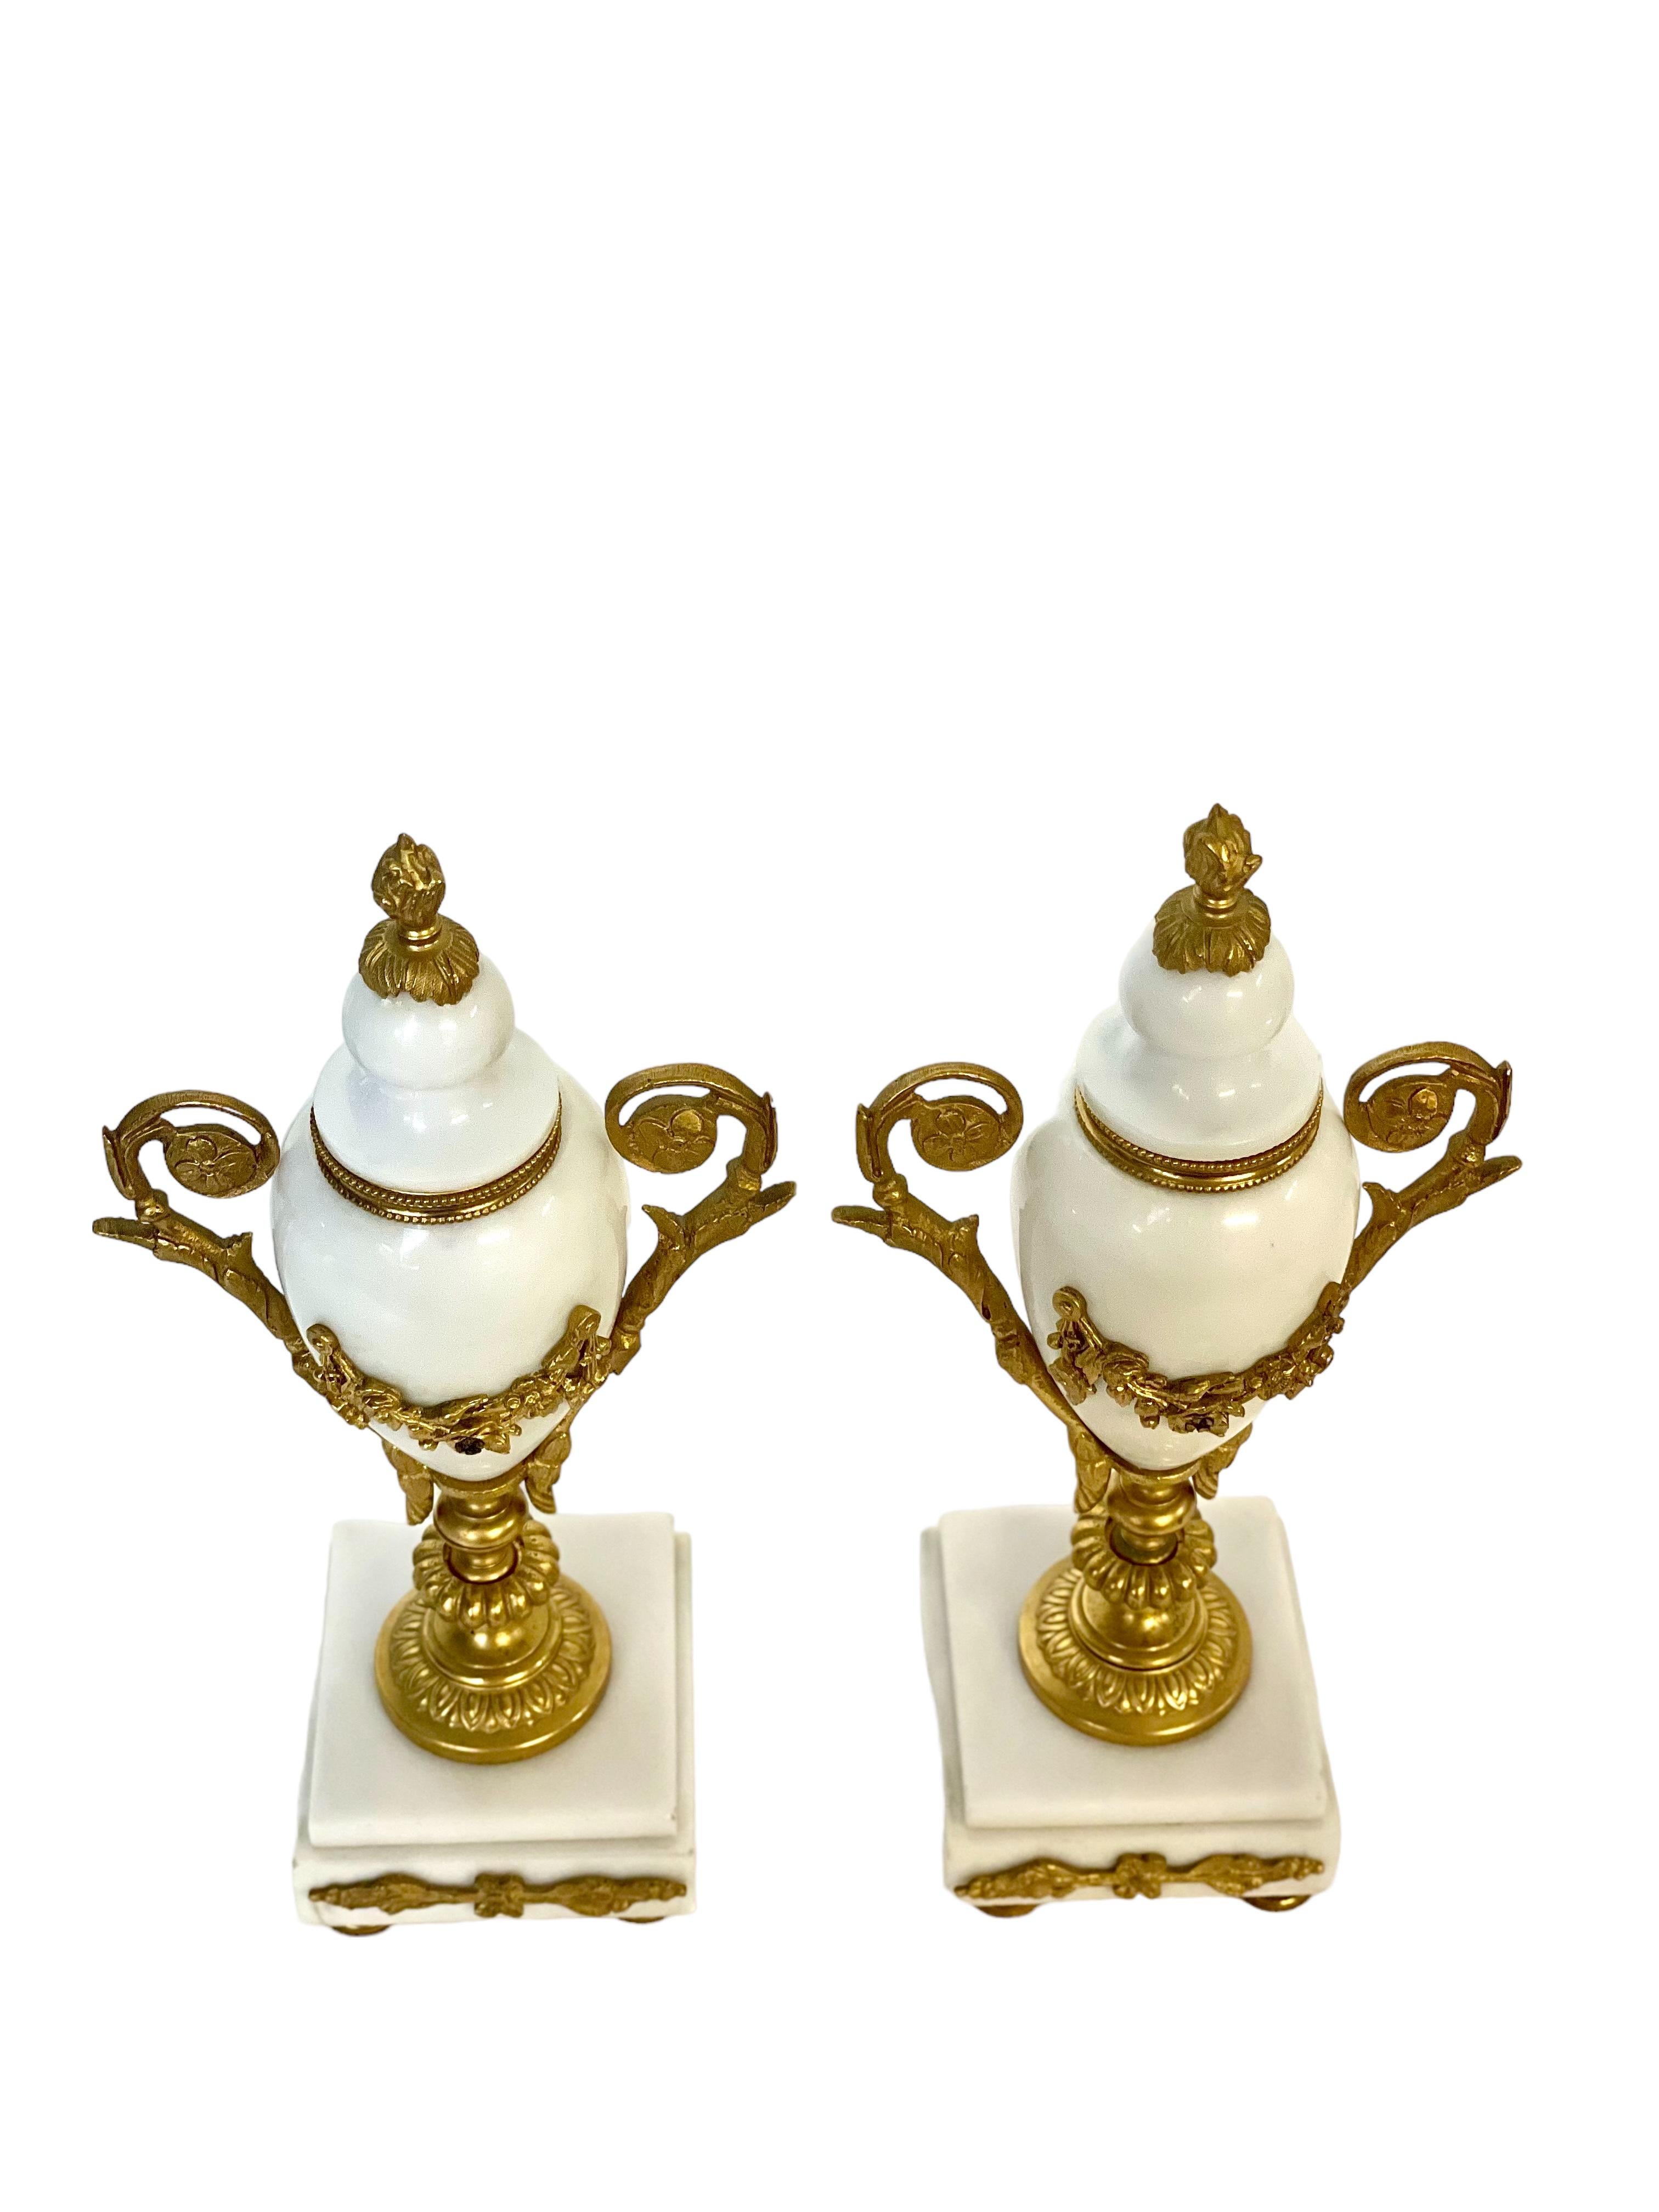 A pair of highly ornate 'Cassolettes' (decorative urns) crafted from white marble mounted with ormolu (finely gilded bronze) and designed to sit atop a mantlepiece, perhaps on either side of a matching clock. Designed to resemble a classically